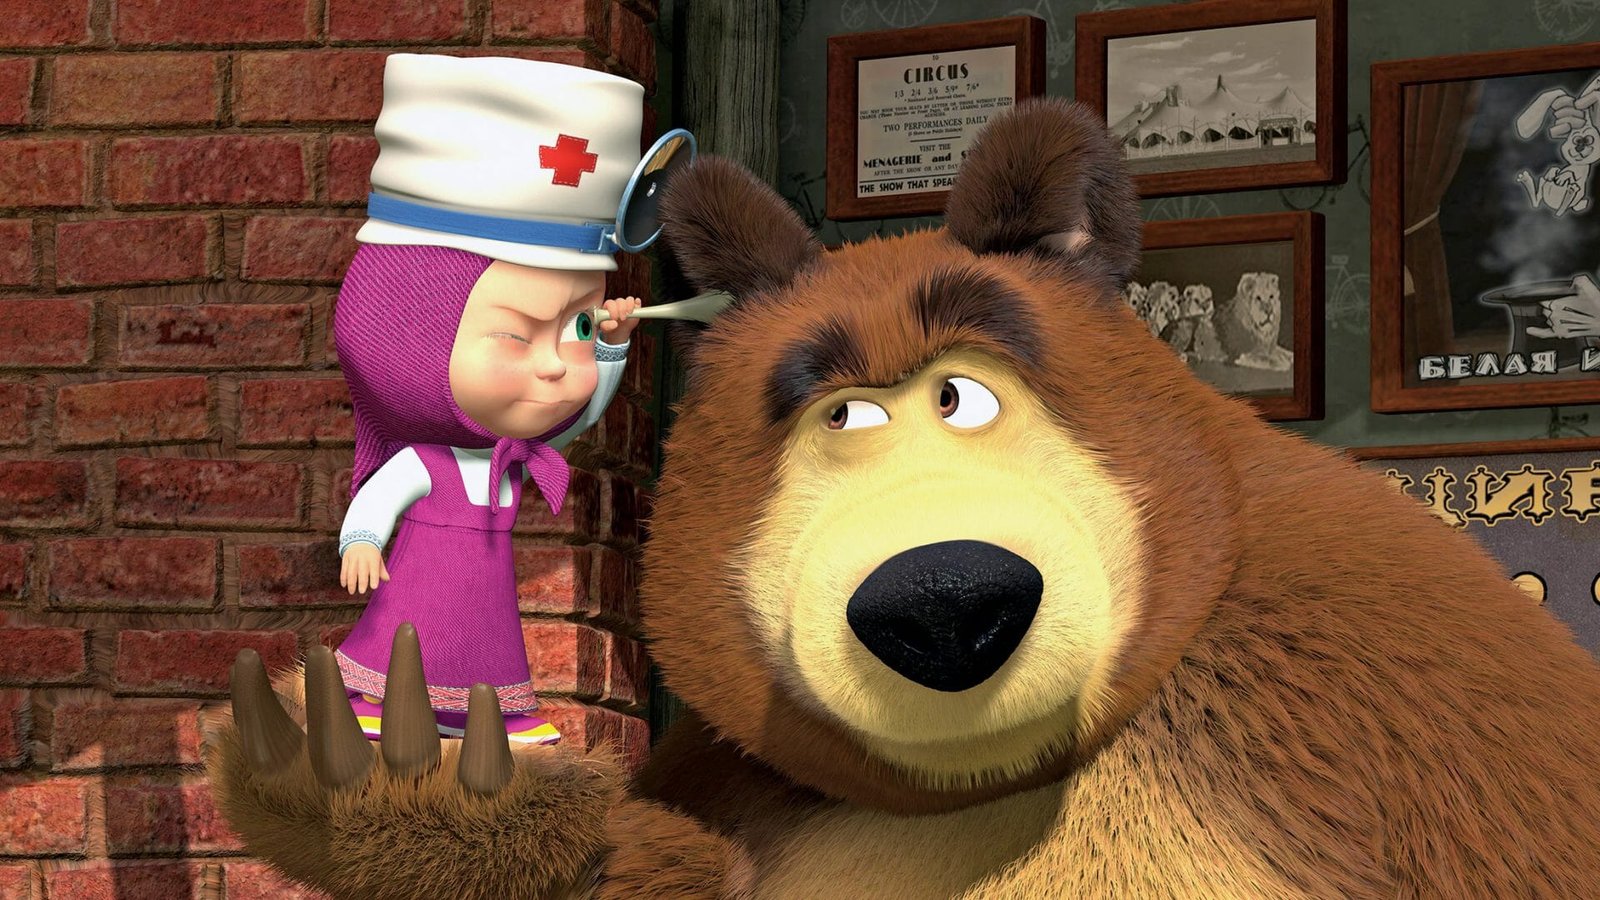 Russian tv shows and movies on netflix: Masha And The Bear